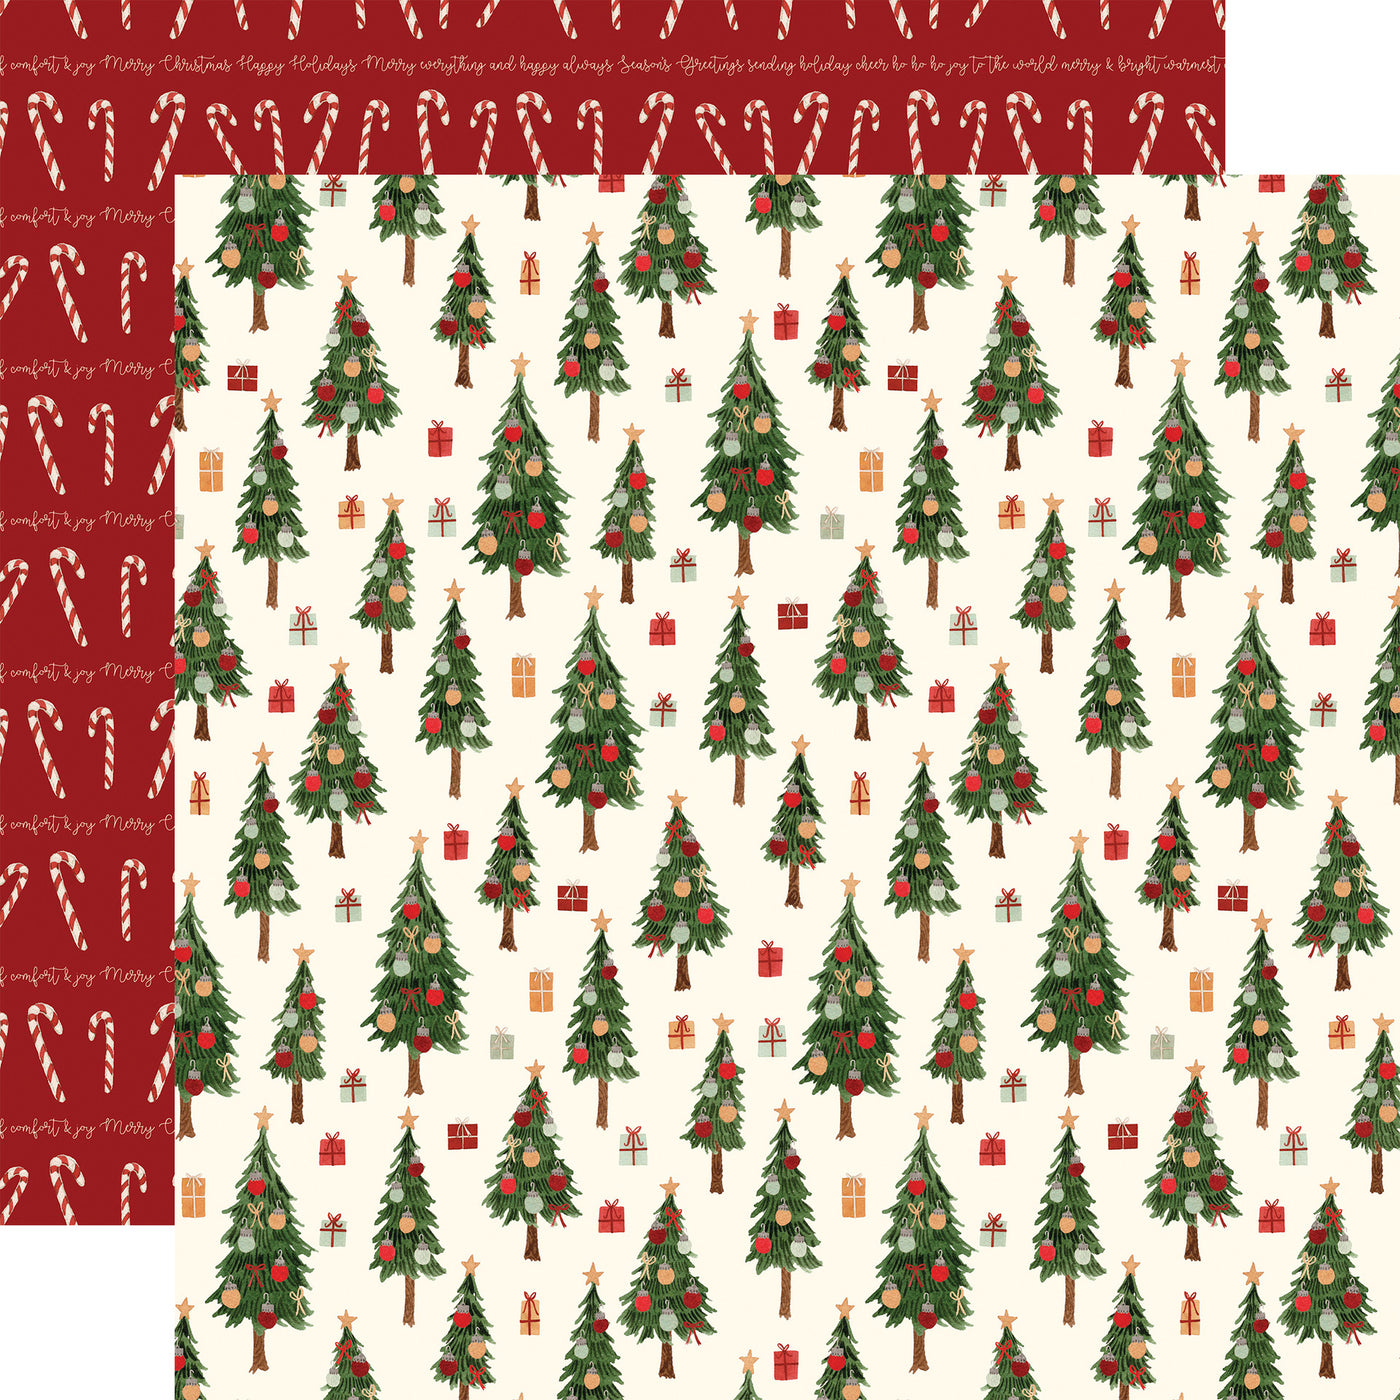 Christmas trees and presents over a cream background. The reverse is a red background with rows of candy canes with alternating rows of Christmas greetings.